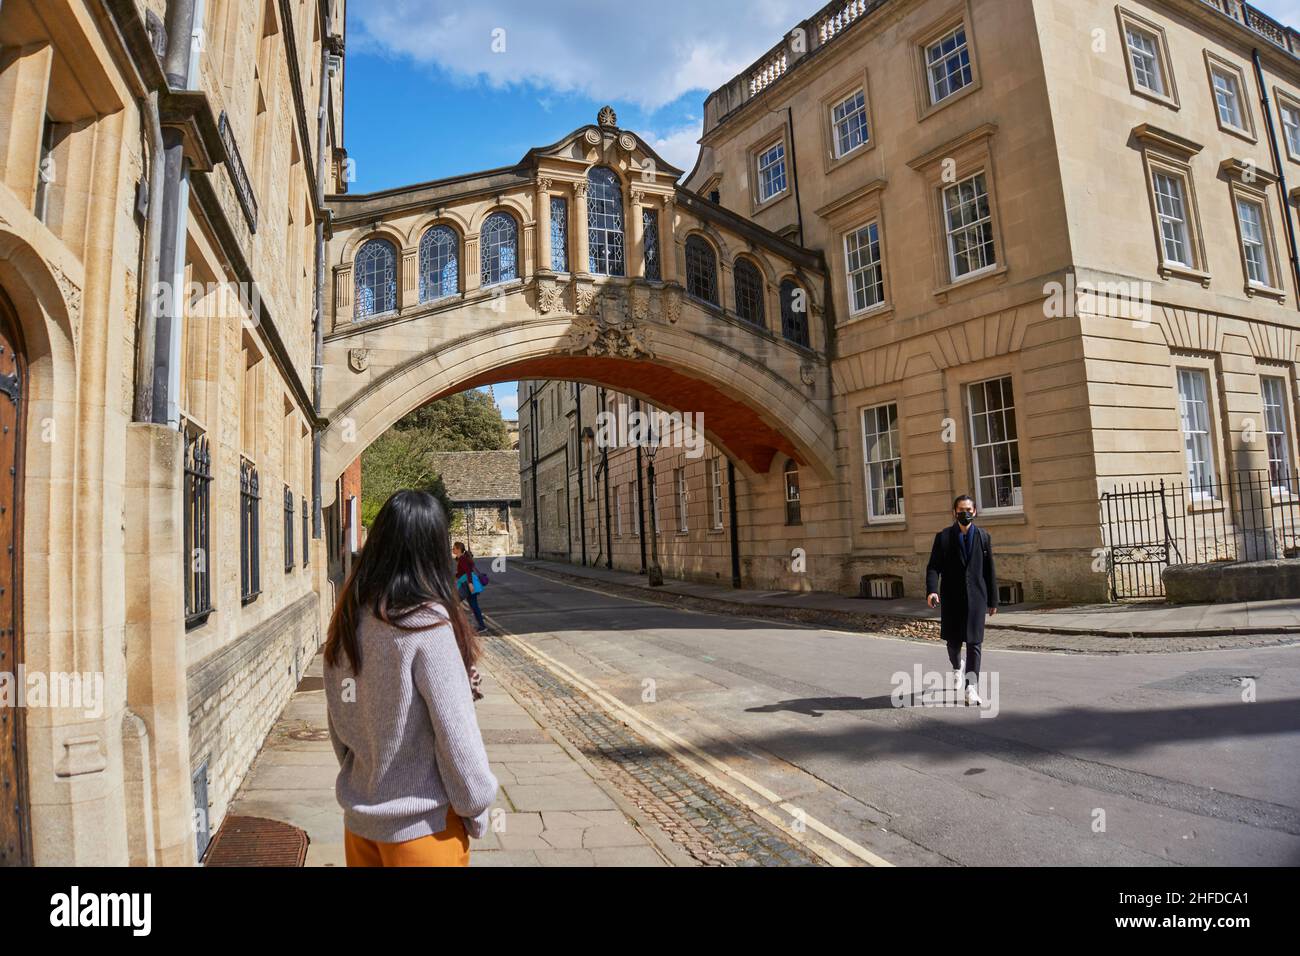 OXFORD, UK - April 13, 2021. Hertford Bridge, or Bridge of Sighs, a skyway between two buildings of Hertford College of Oxford University, Oxford, Eng Stock Photo